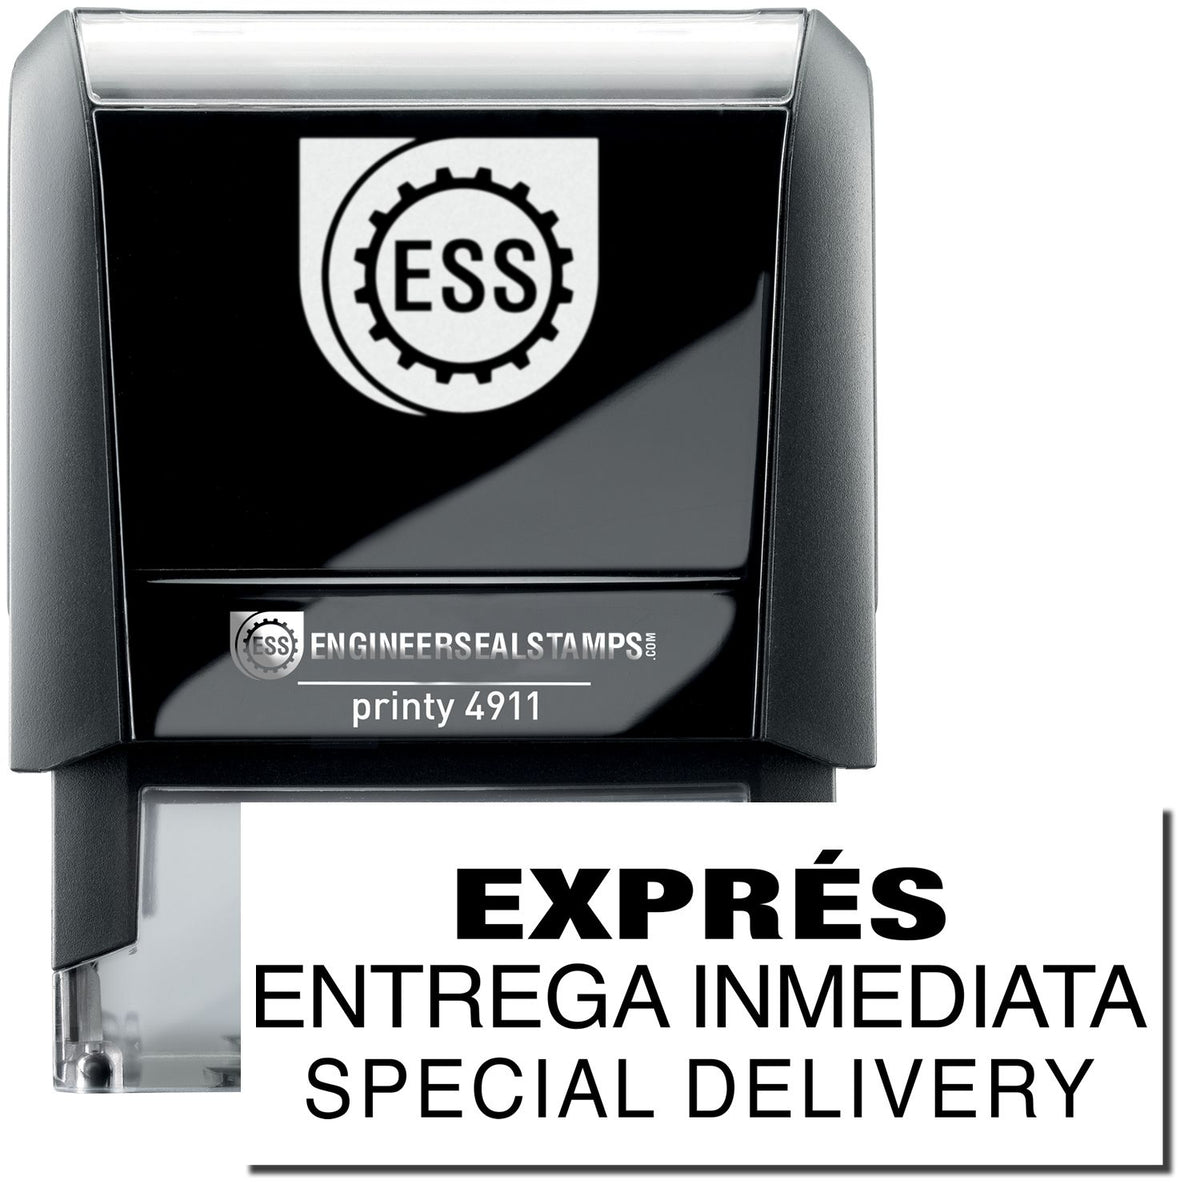 A self-inking stamp with a stamped image showing how the text &quot;EXPRES ENTREGA IMMEDIATA SPECIAL DELIVERY&quot; is displayed after stamping.